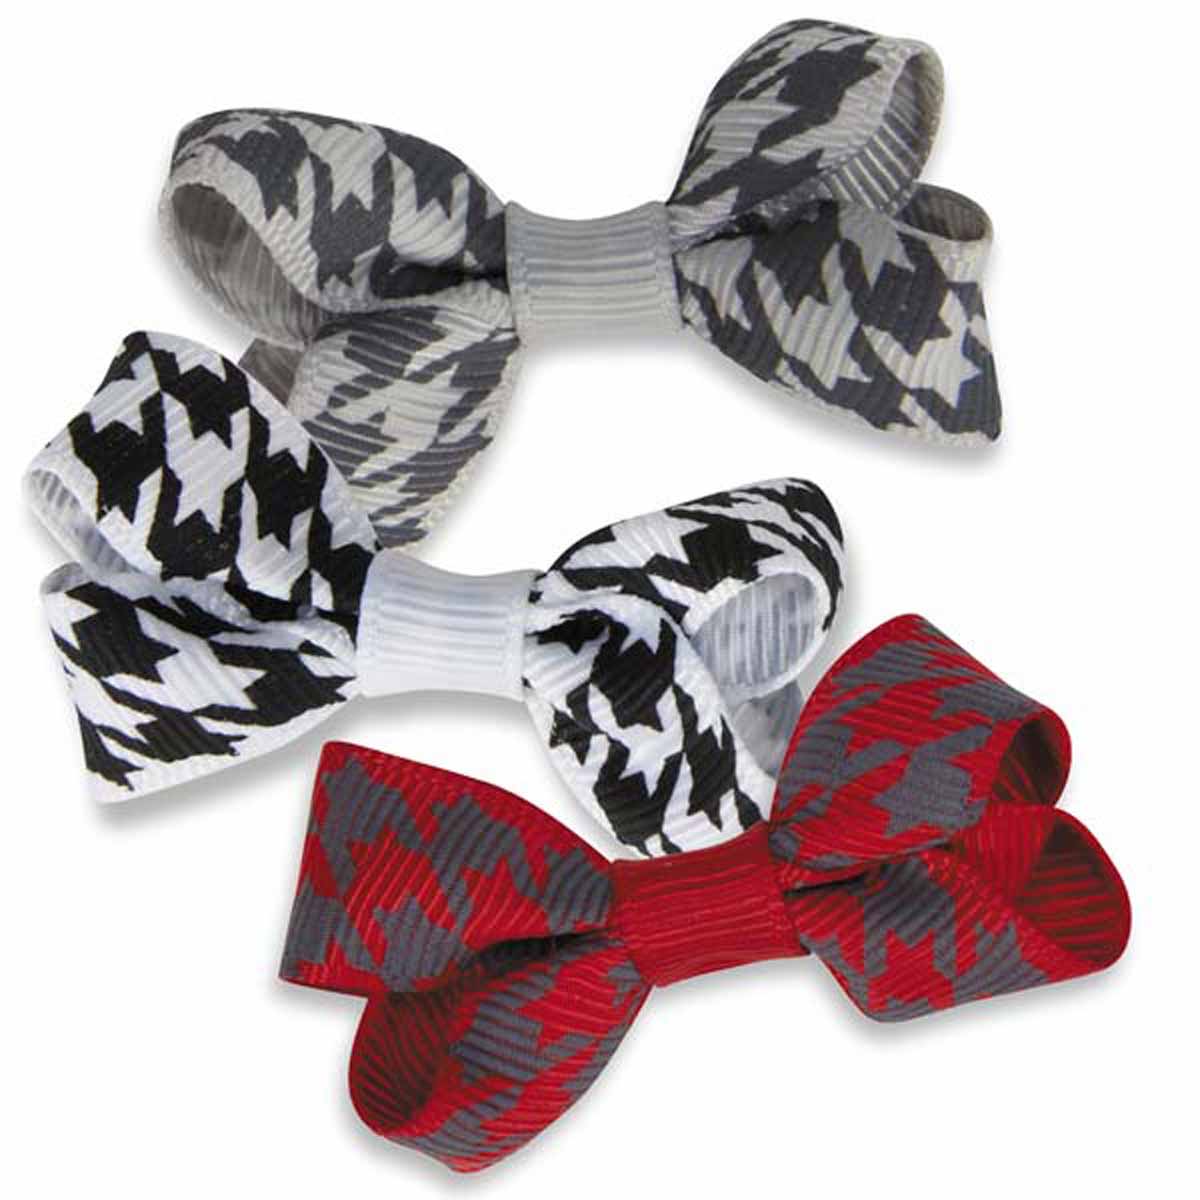 Dt9988 48 Coco Dog Bows - 6 Assorted Bows